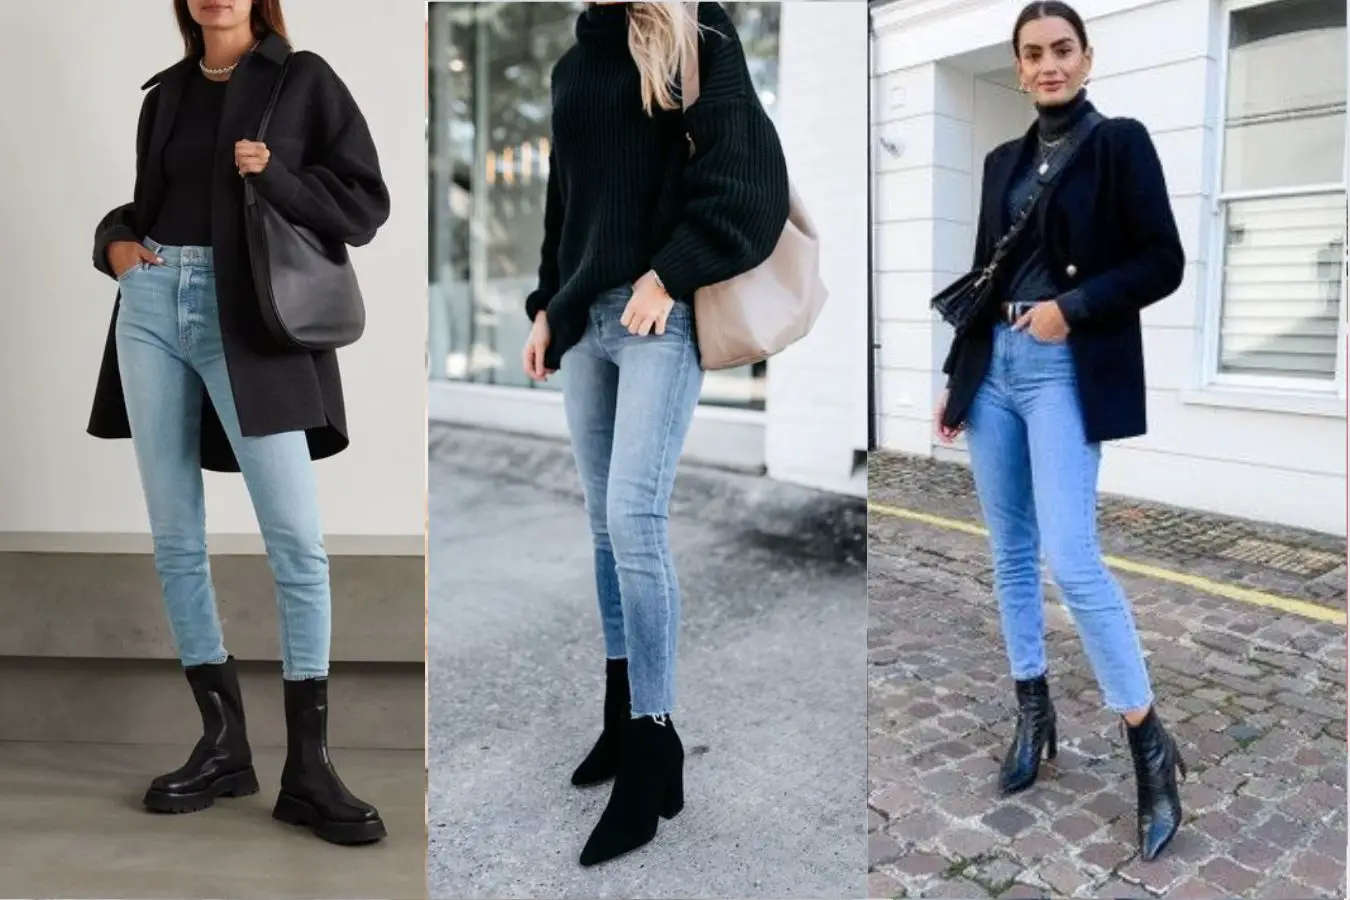 Pair Light Blue Jeans With Black Sweater And Boots